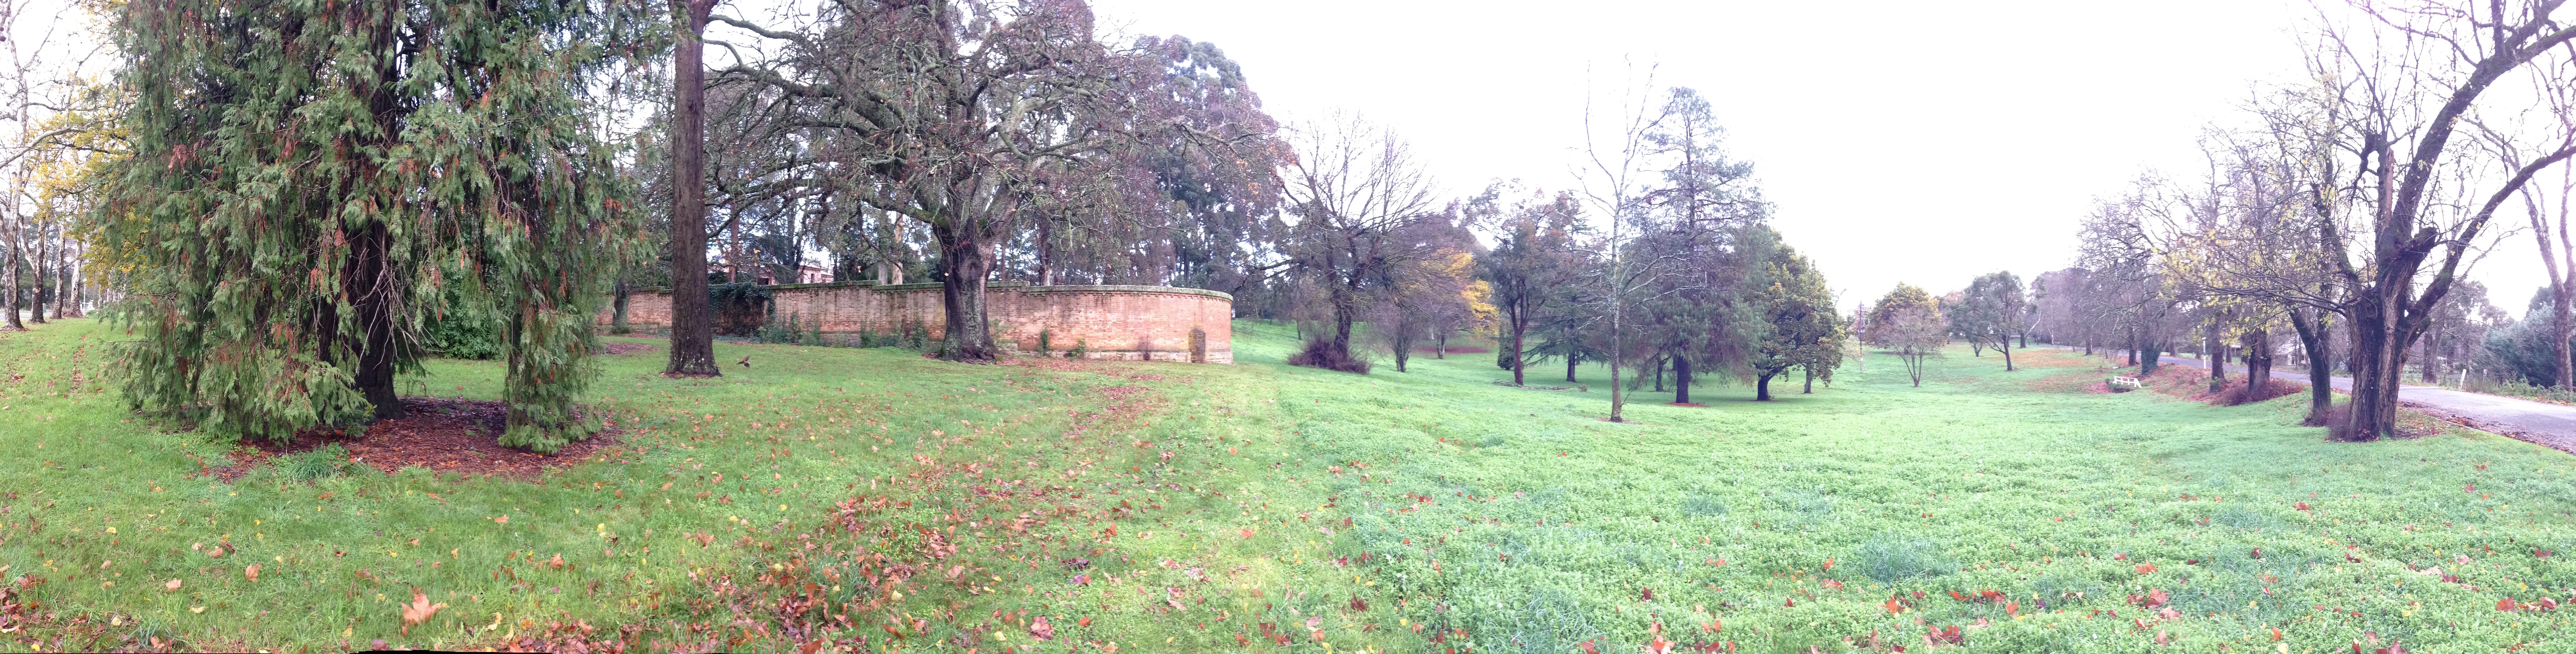 One view of the grounds at Mayday Hills, including part of the dismantled Ha-Ha wall: Photograph by J. Munday, 2014.